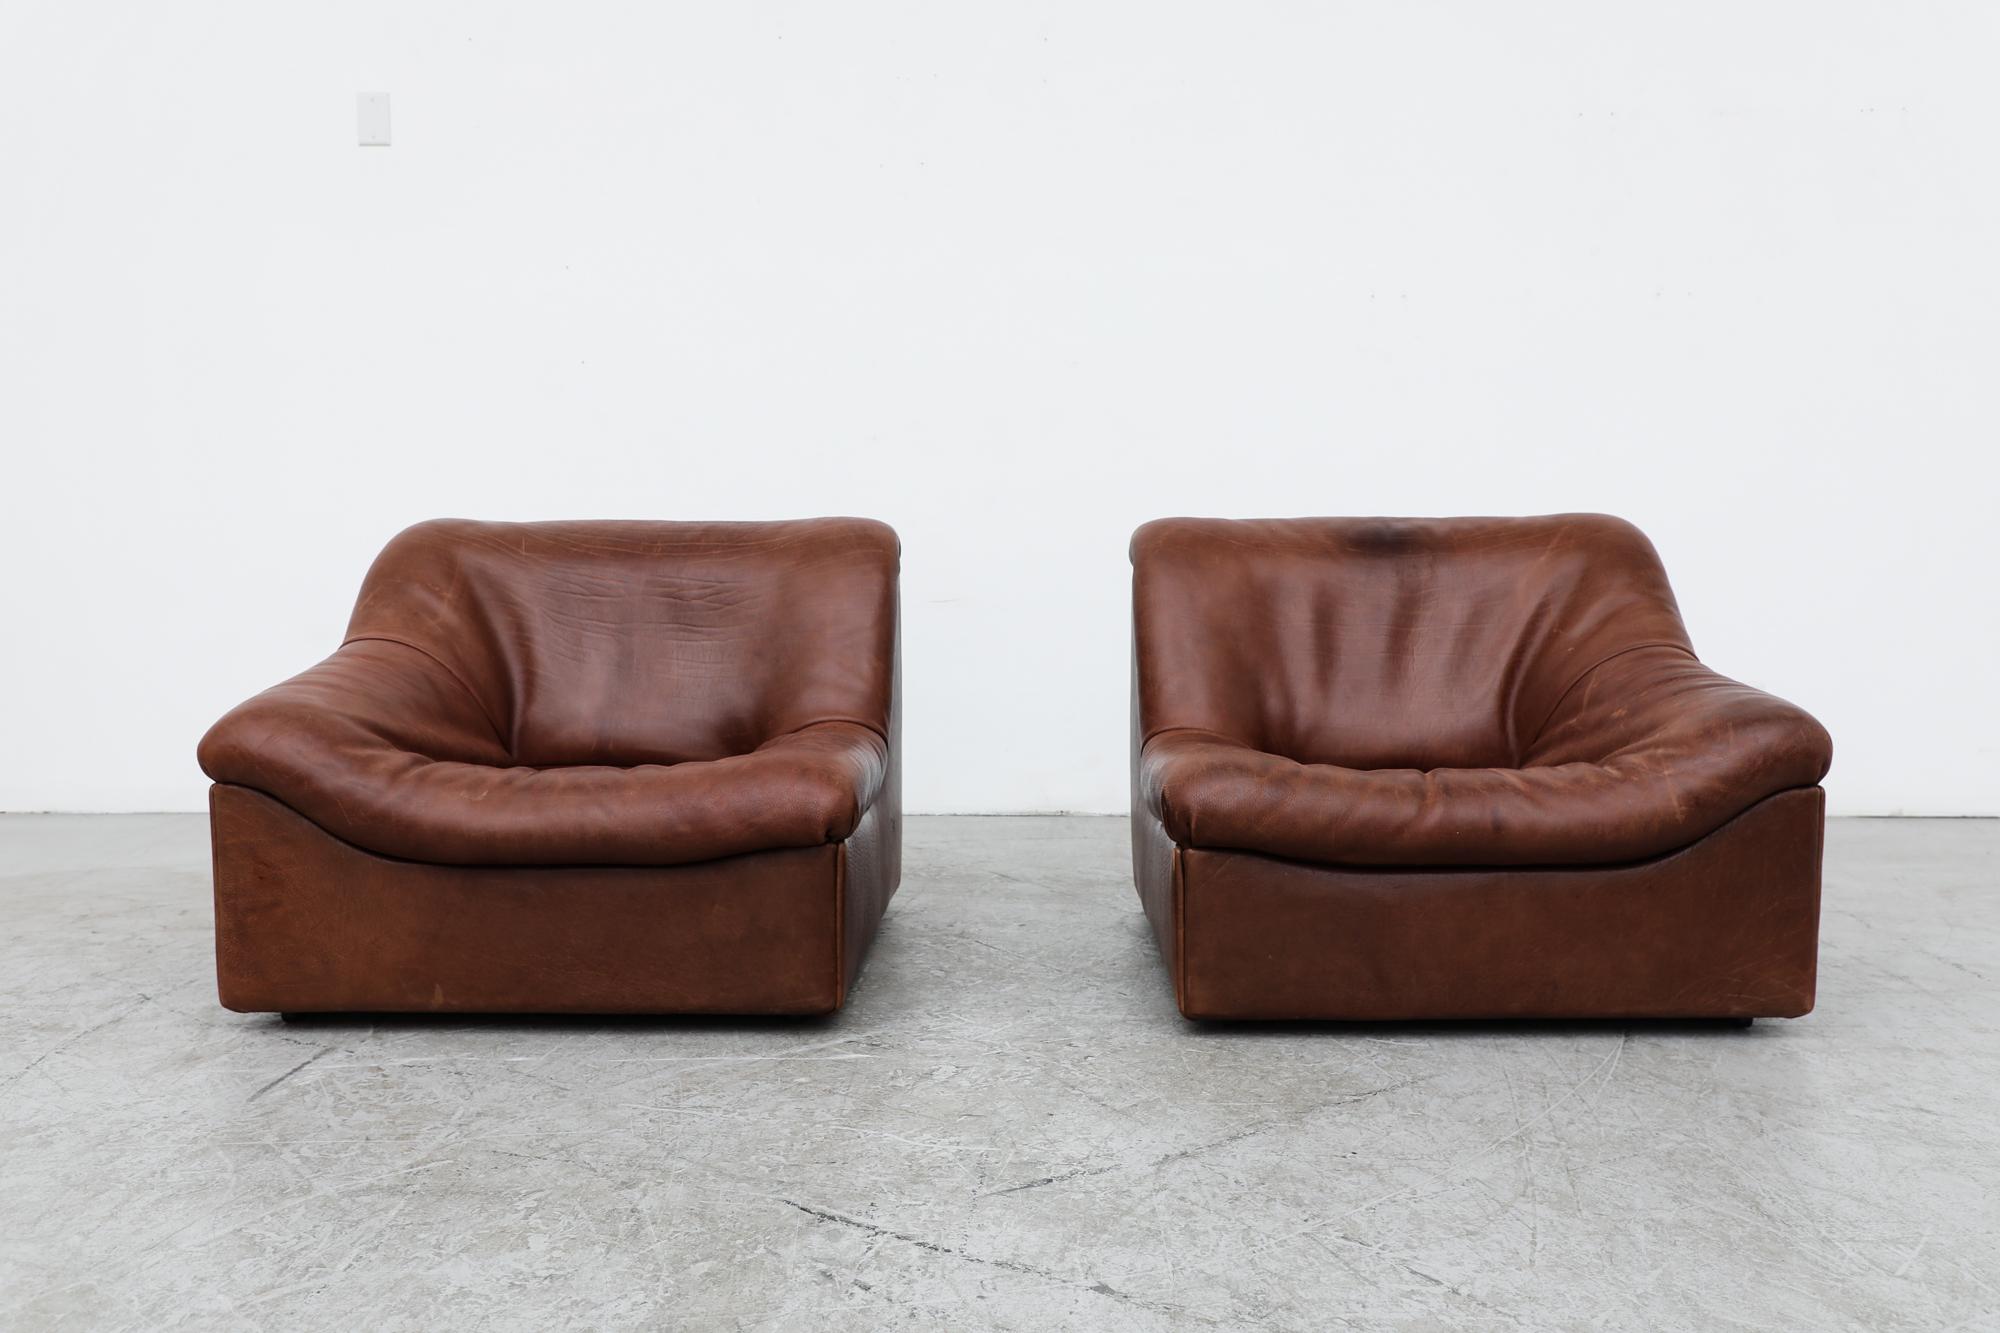 Thick leather model DS46 loveseat by De Sede, Switzerland, 1970's with undulating, bucket style seats. In original condition. leather has visible patina and signs of wear, Set price.